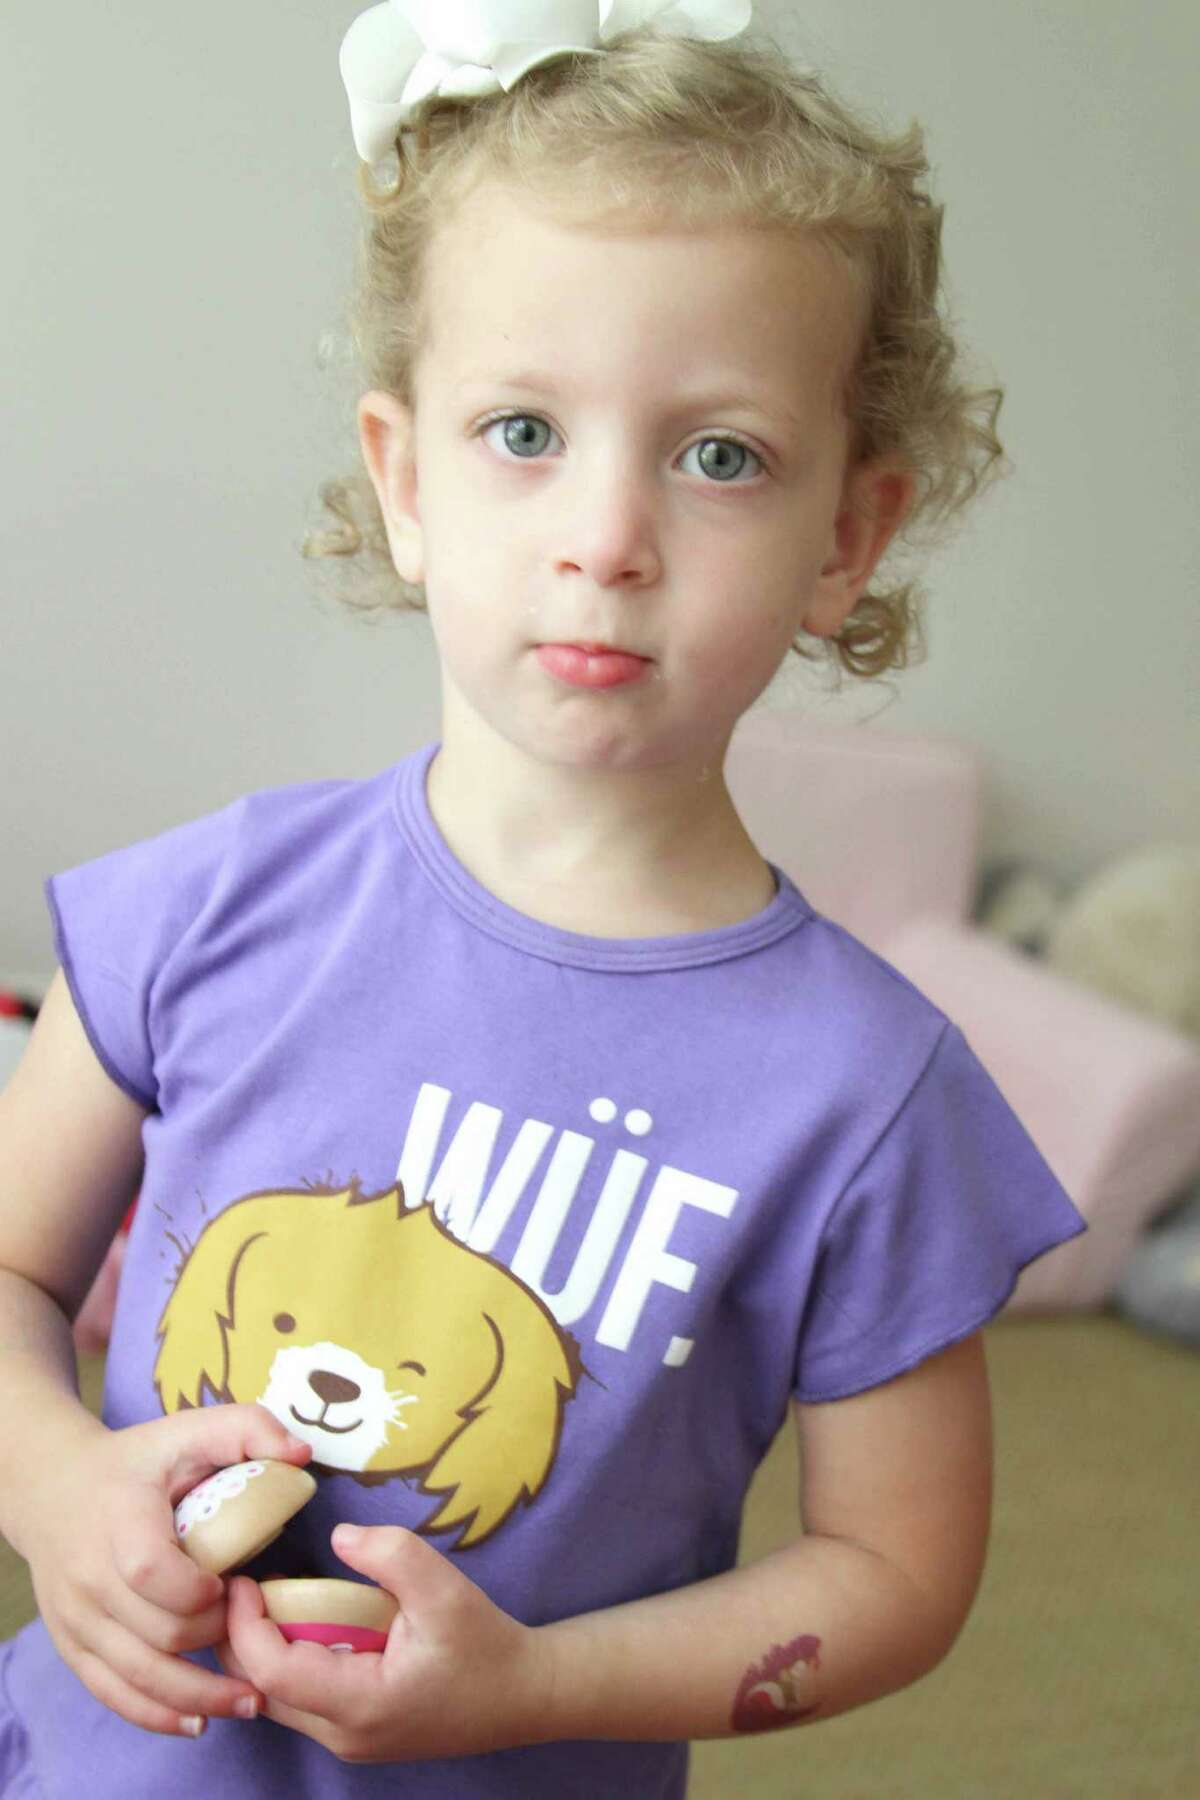 Madison Rose, 3, wears a Cuteheads top.